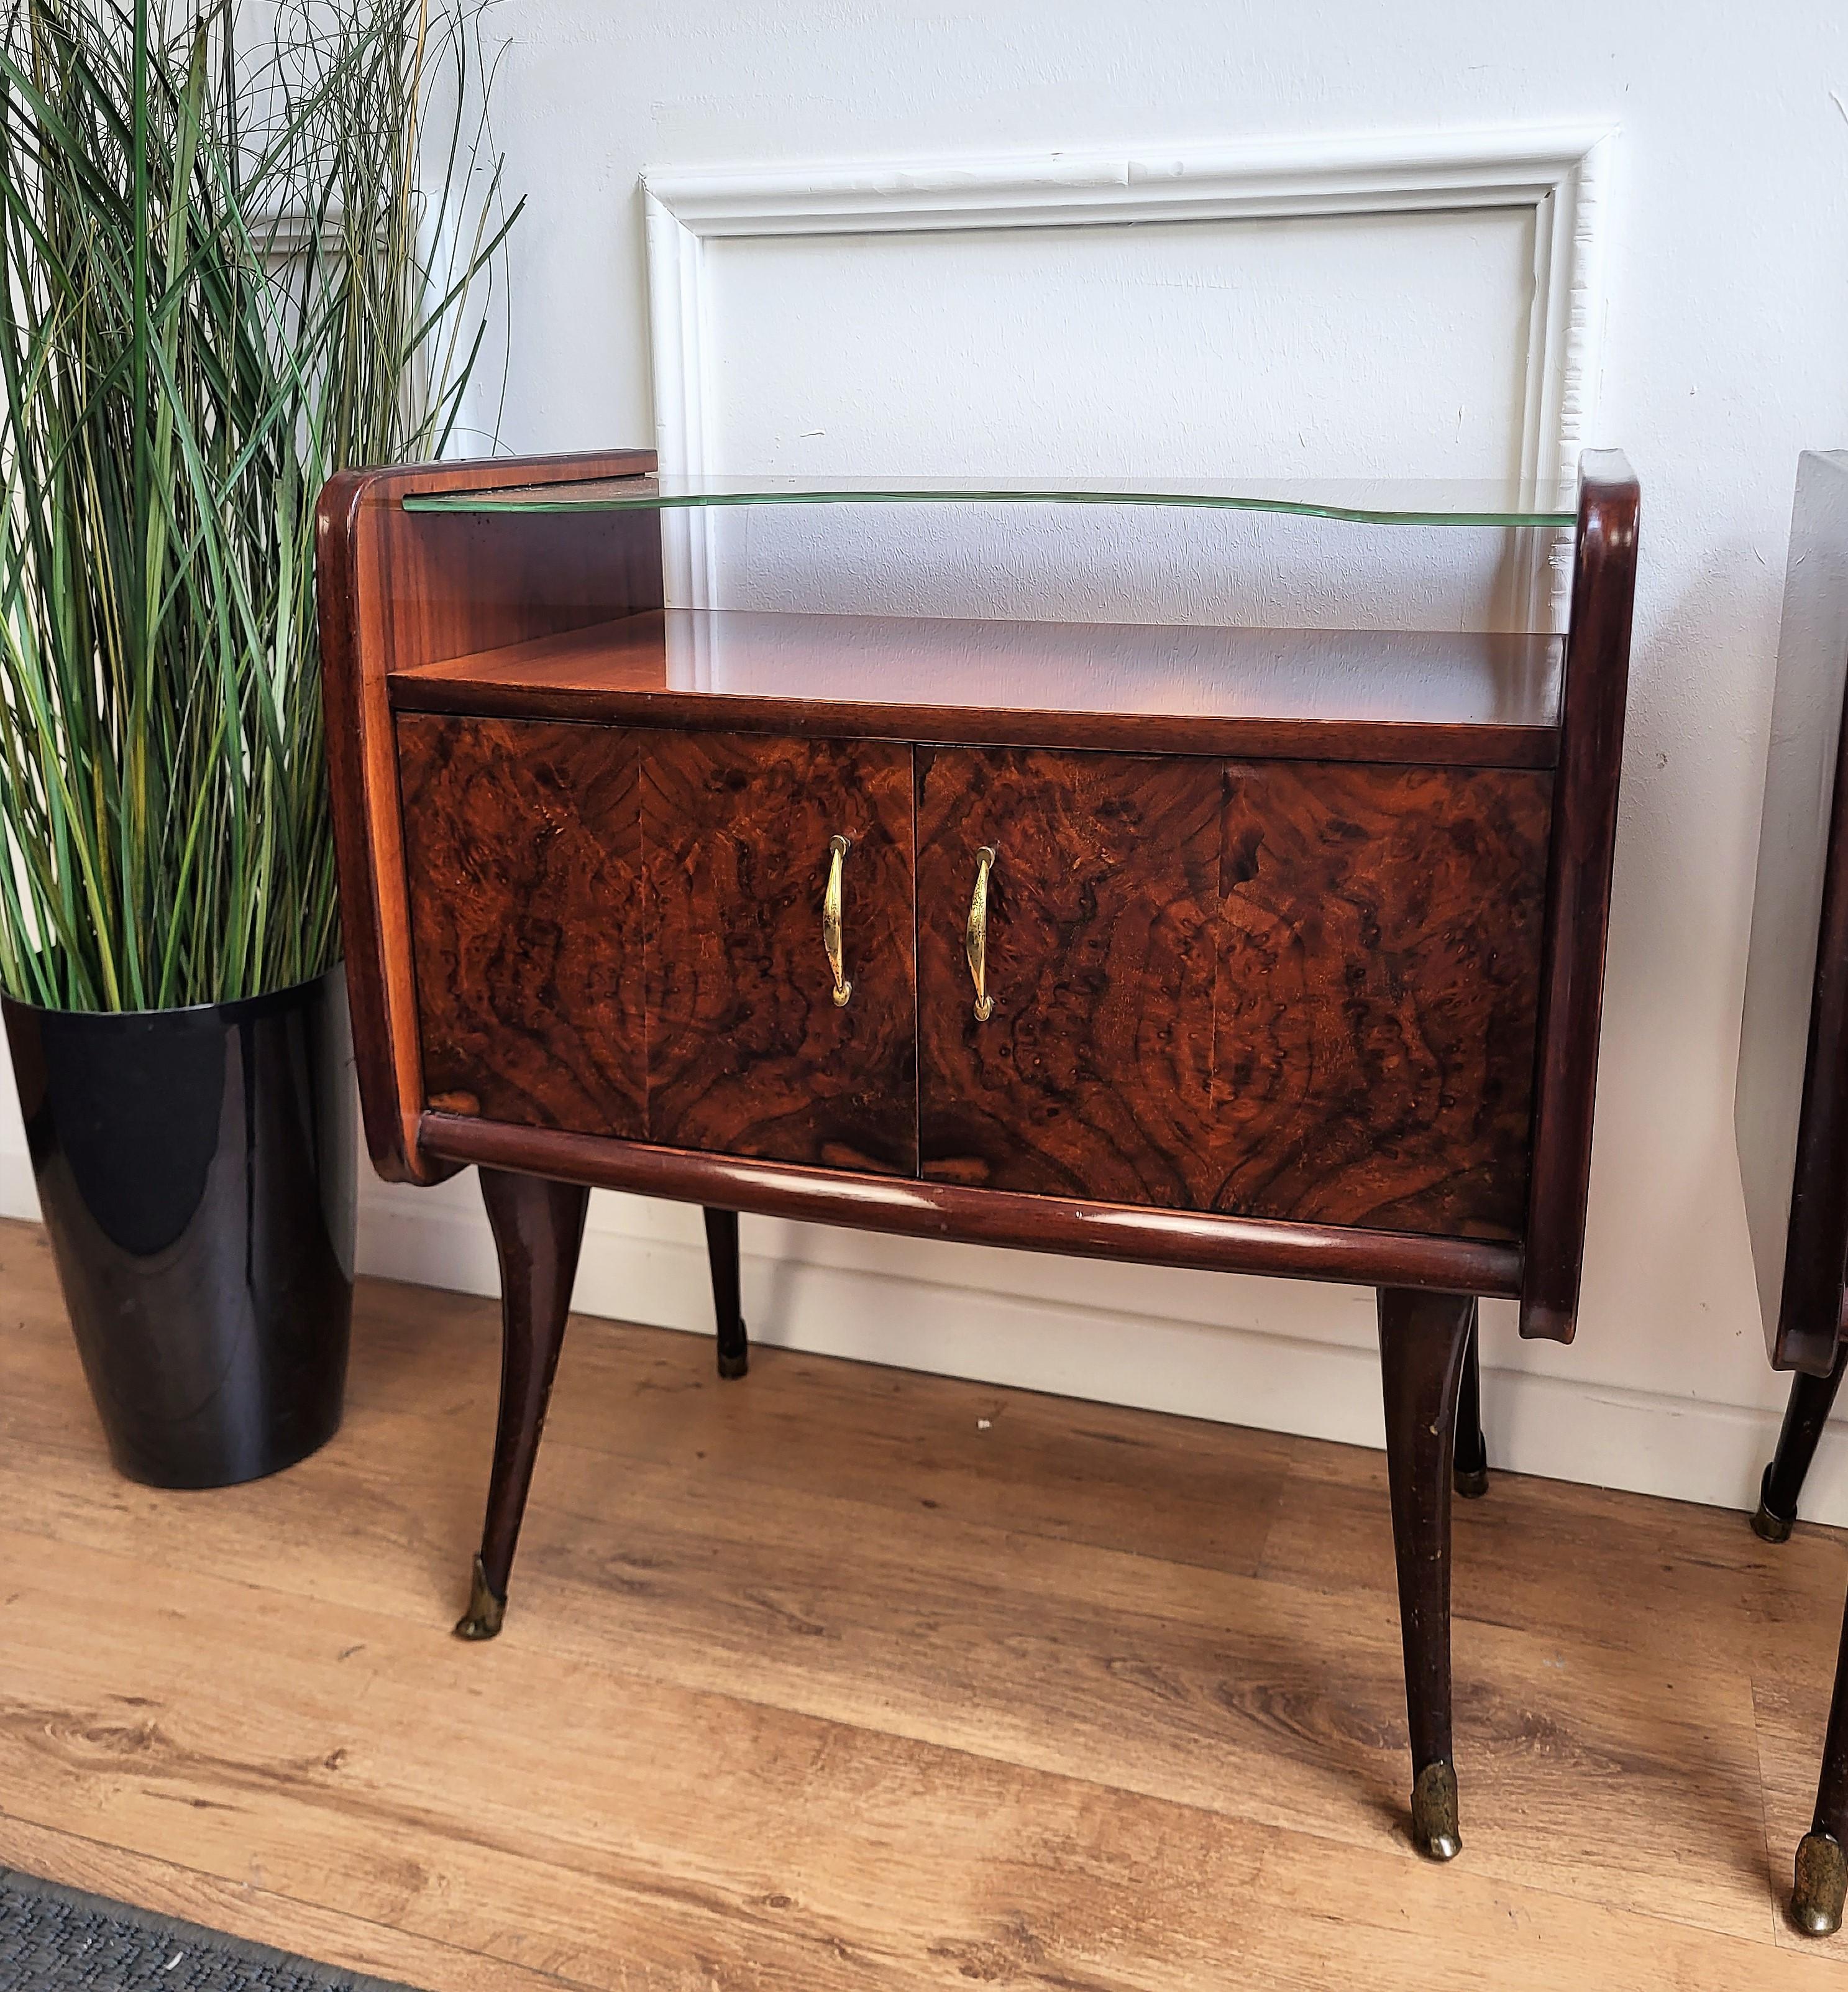 Very elegant and refined Italian 1950s Mid-Century Modern pair of bed side night stands tables in walnut veneer wood with front flip door and demilune glass top with brass details such as the handles and the 4 fluted legs finials. Those nightstands